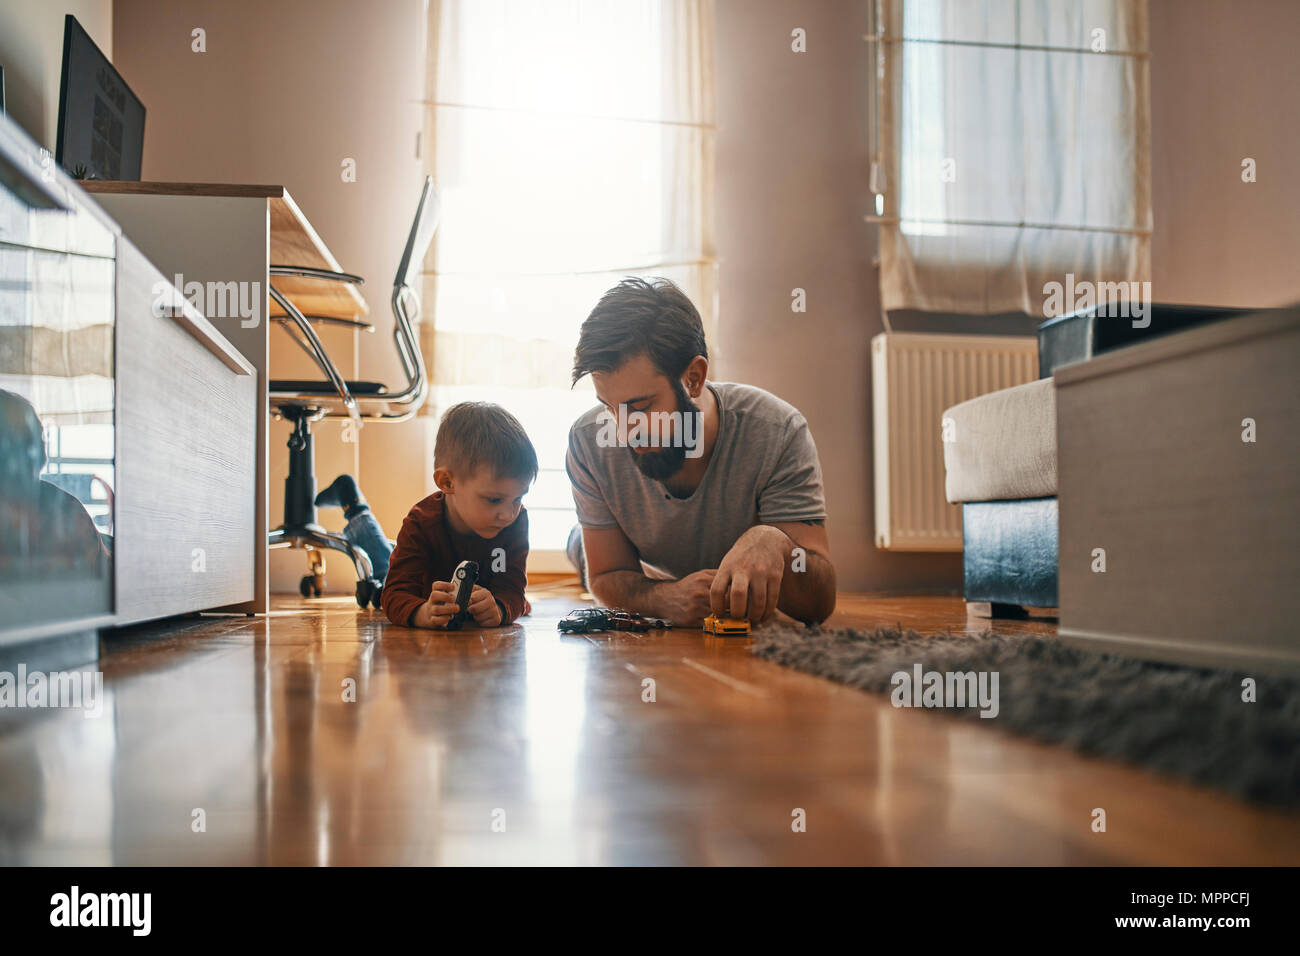 Father and son lying together on the floor playing with toy cars Stock Photo